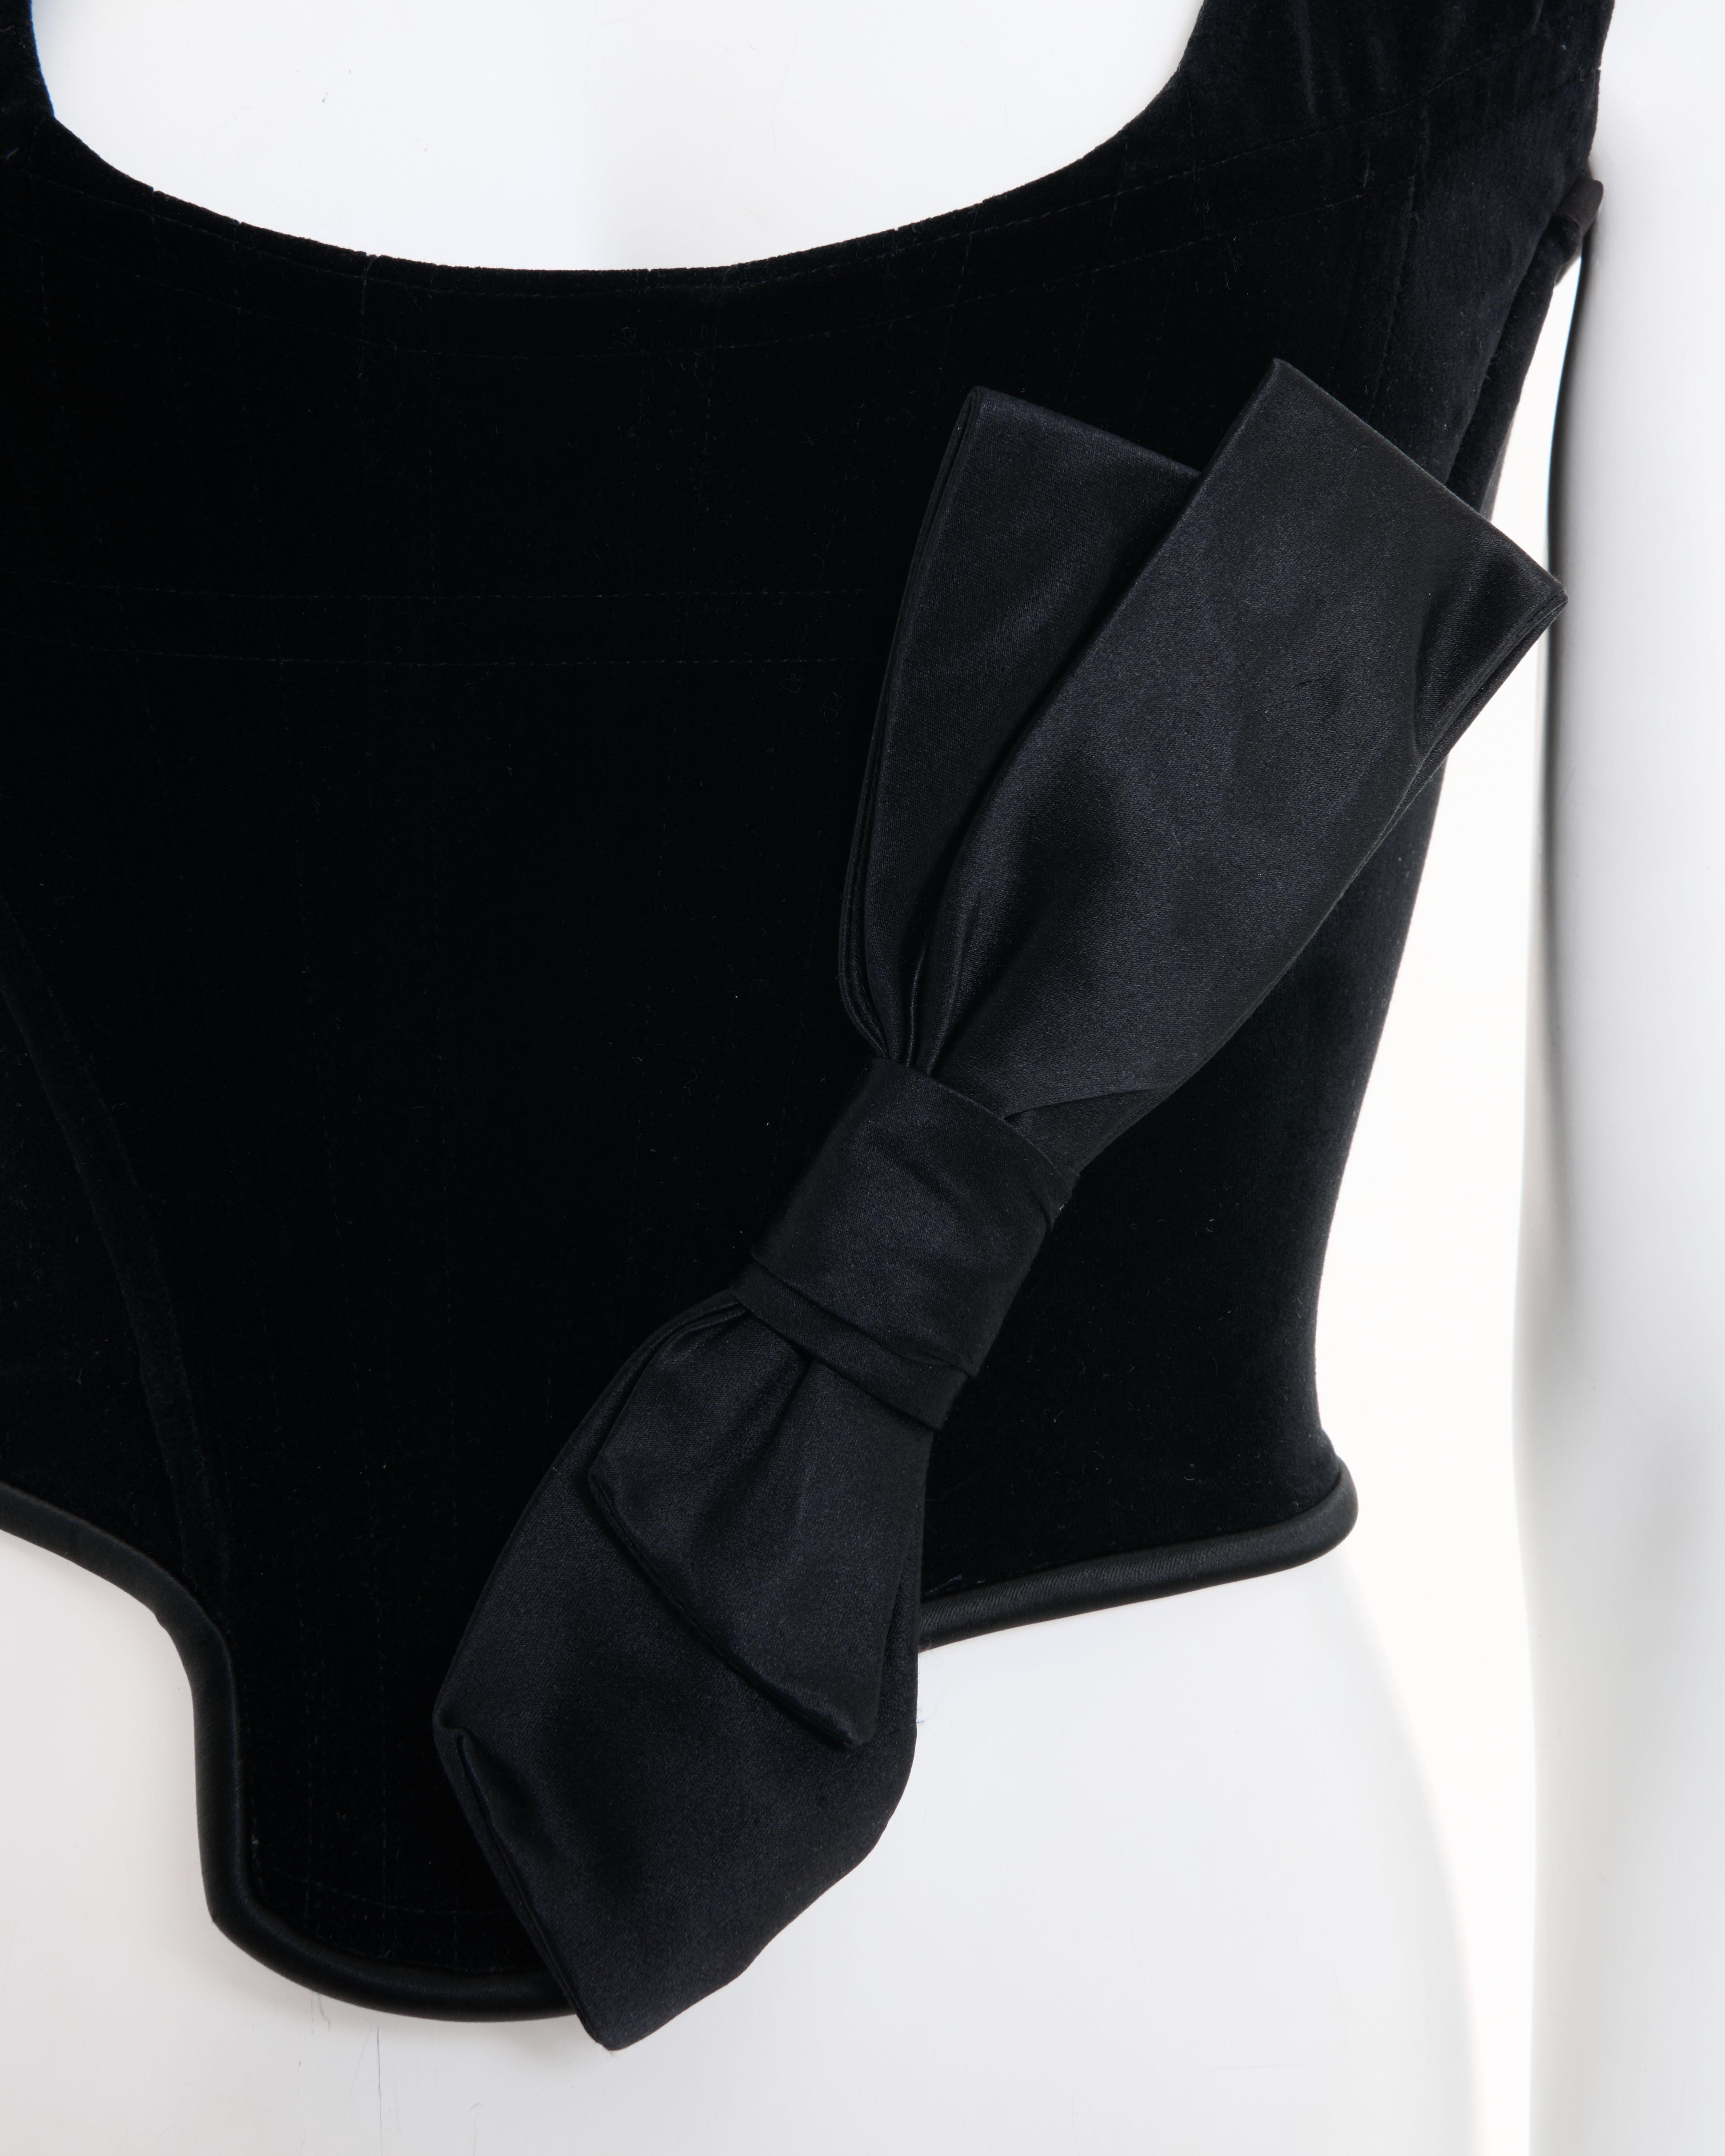 Vivienne Westwood F/W 1996 Couture Black velvet and satin bow corset  In Excellent Condition For Sale In Milano, IT